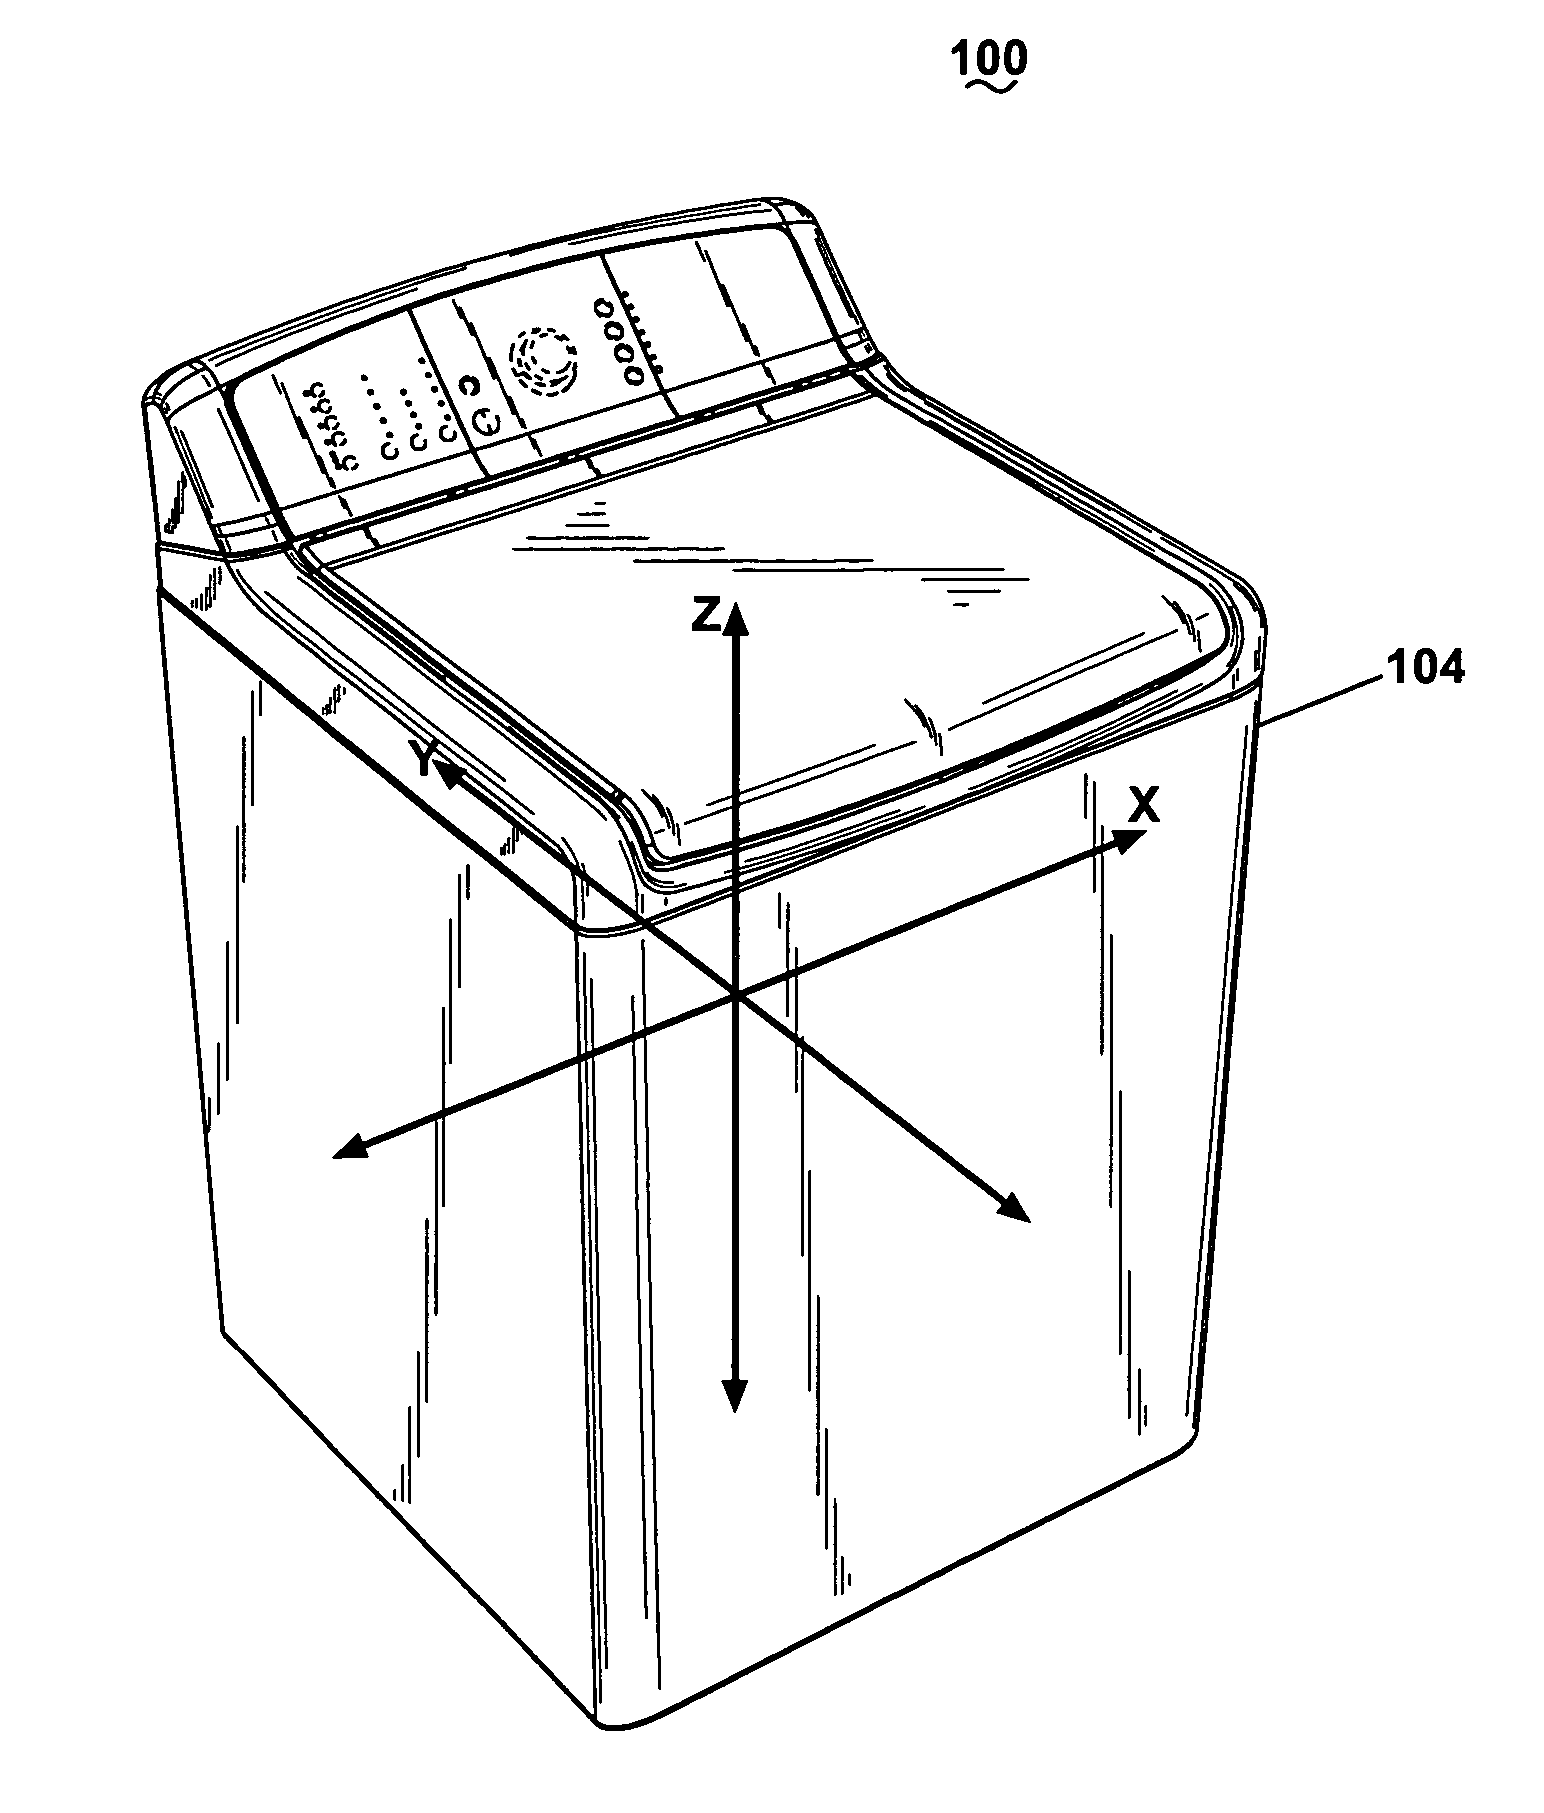 Method of detecting an off-balance condition of a clothes load in a washing machine